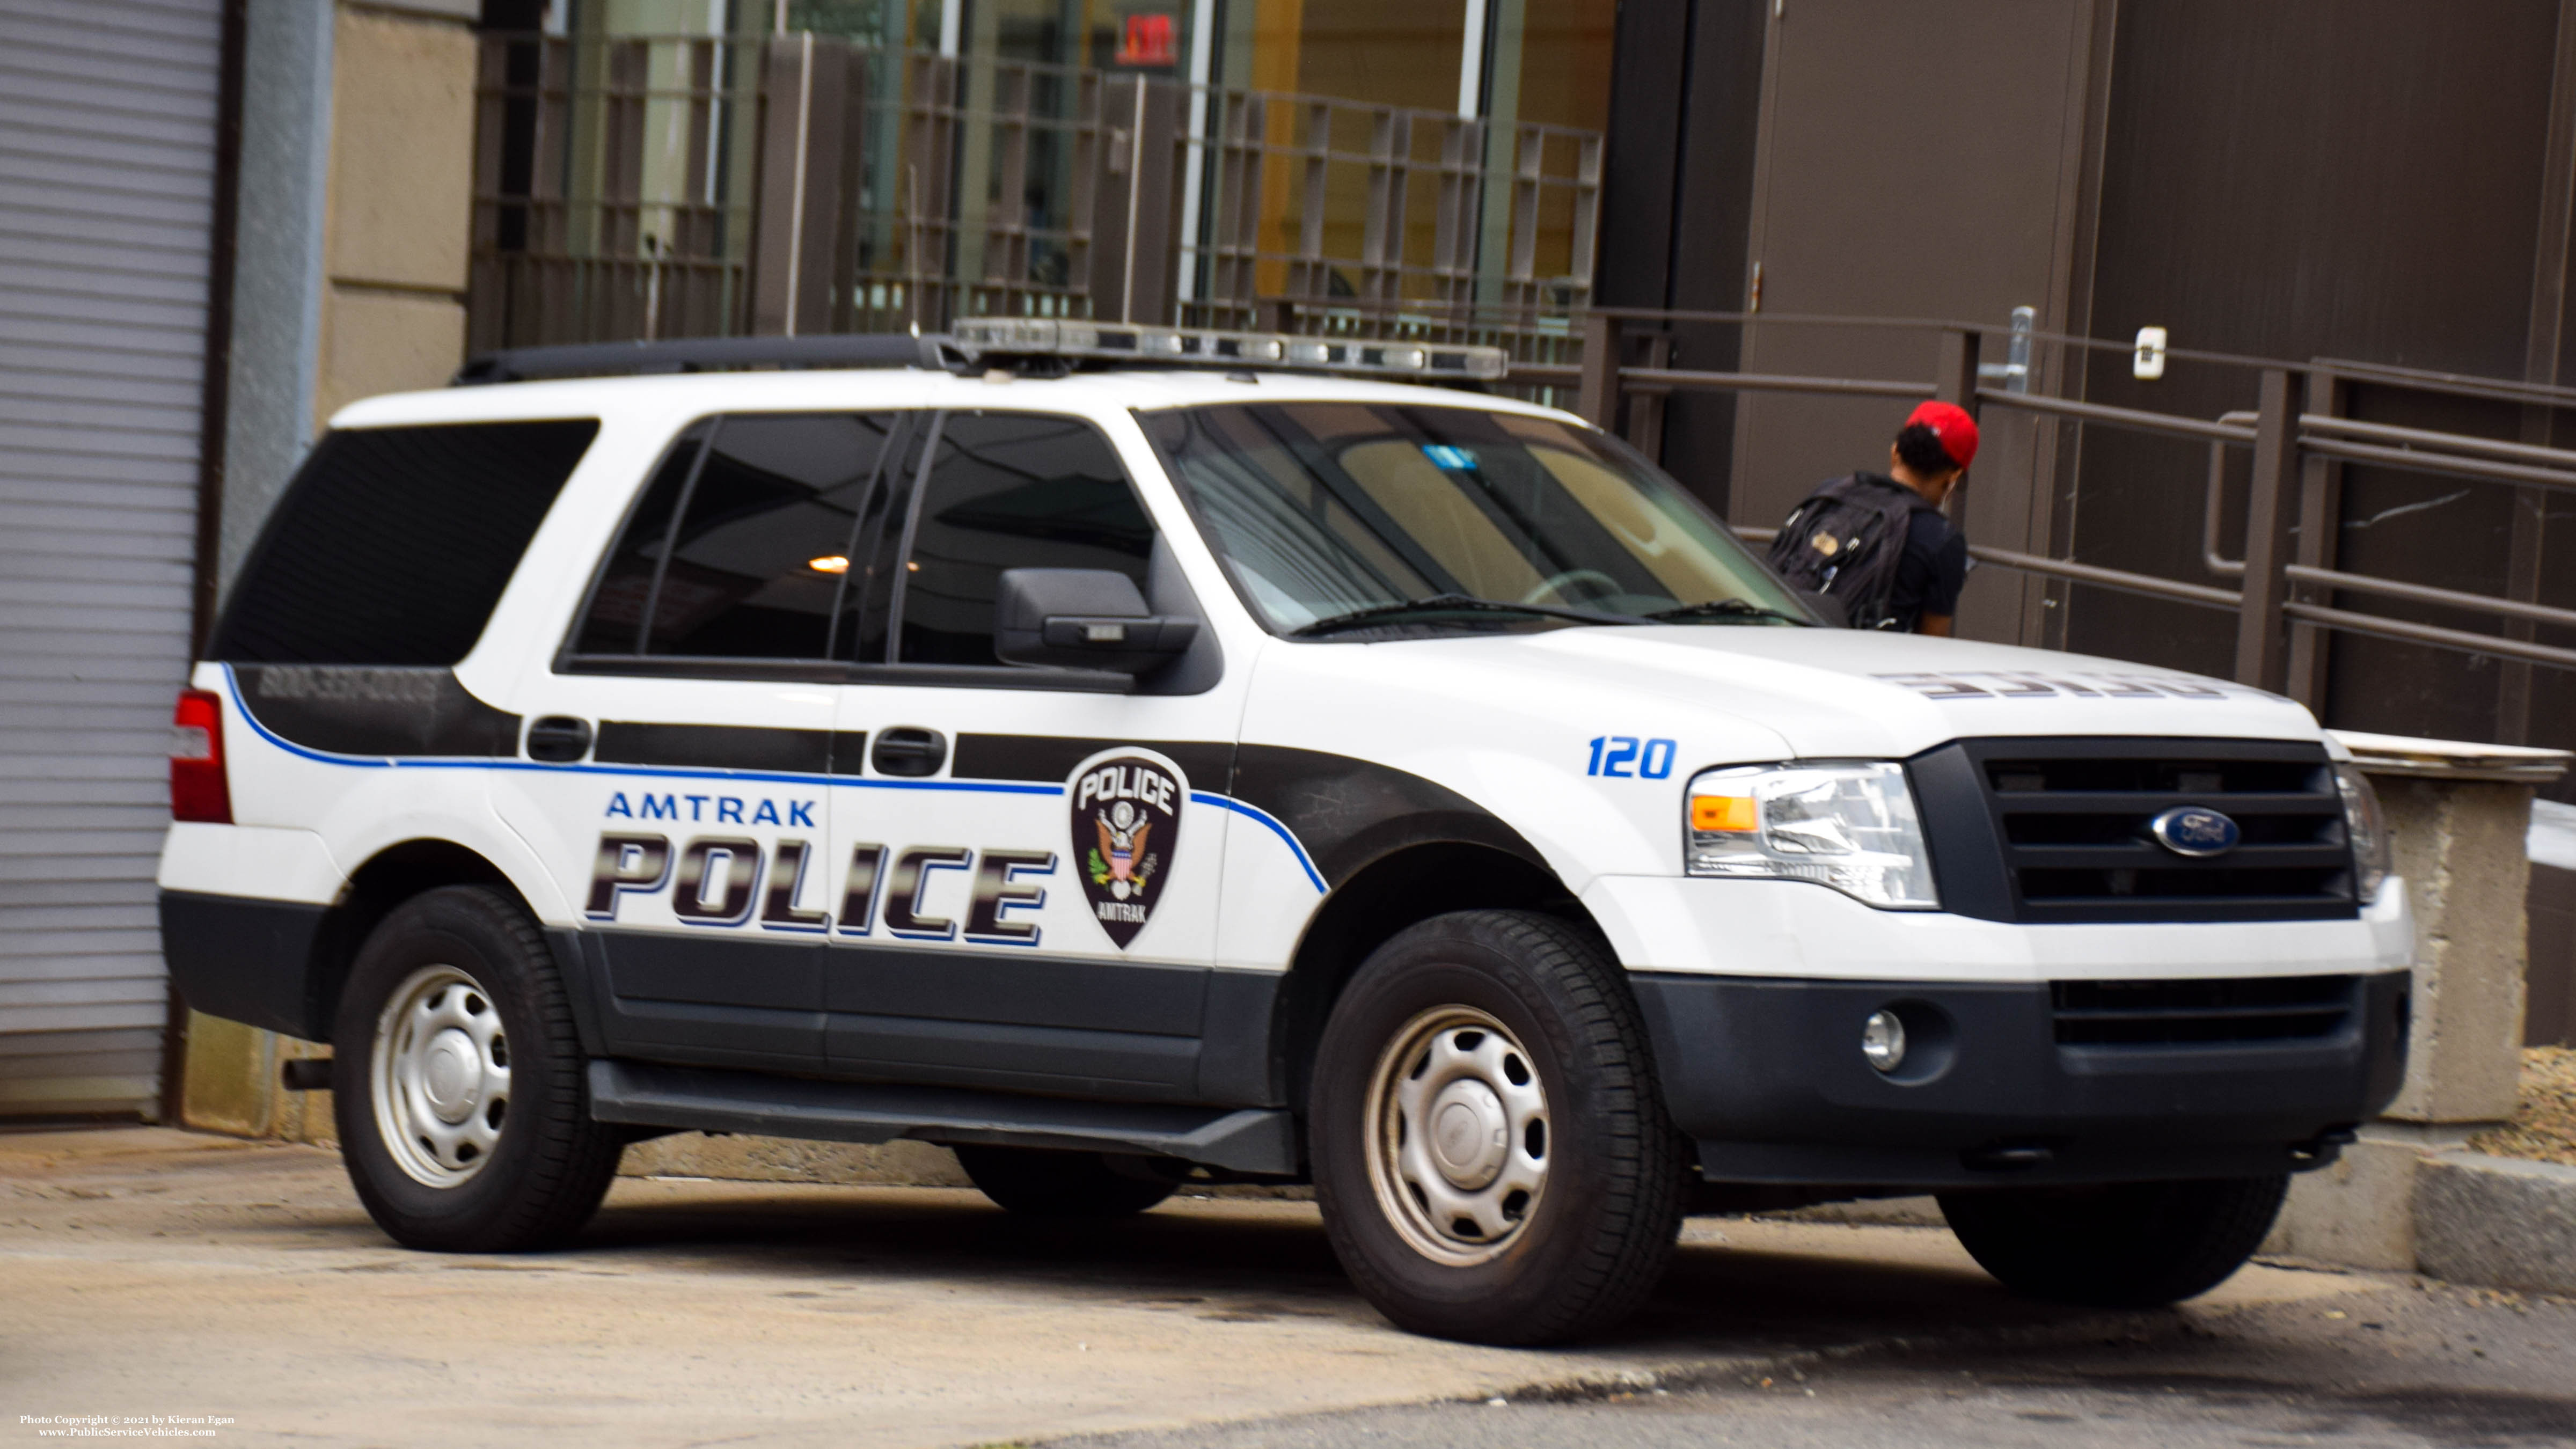 A photo  of Amtrak Police
            Cruiser 120, a 2007-2014 Ford Expedition             taken by Kieran Egan